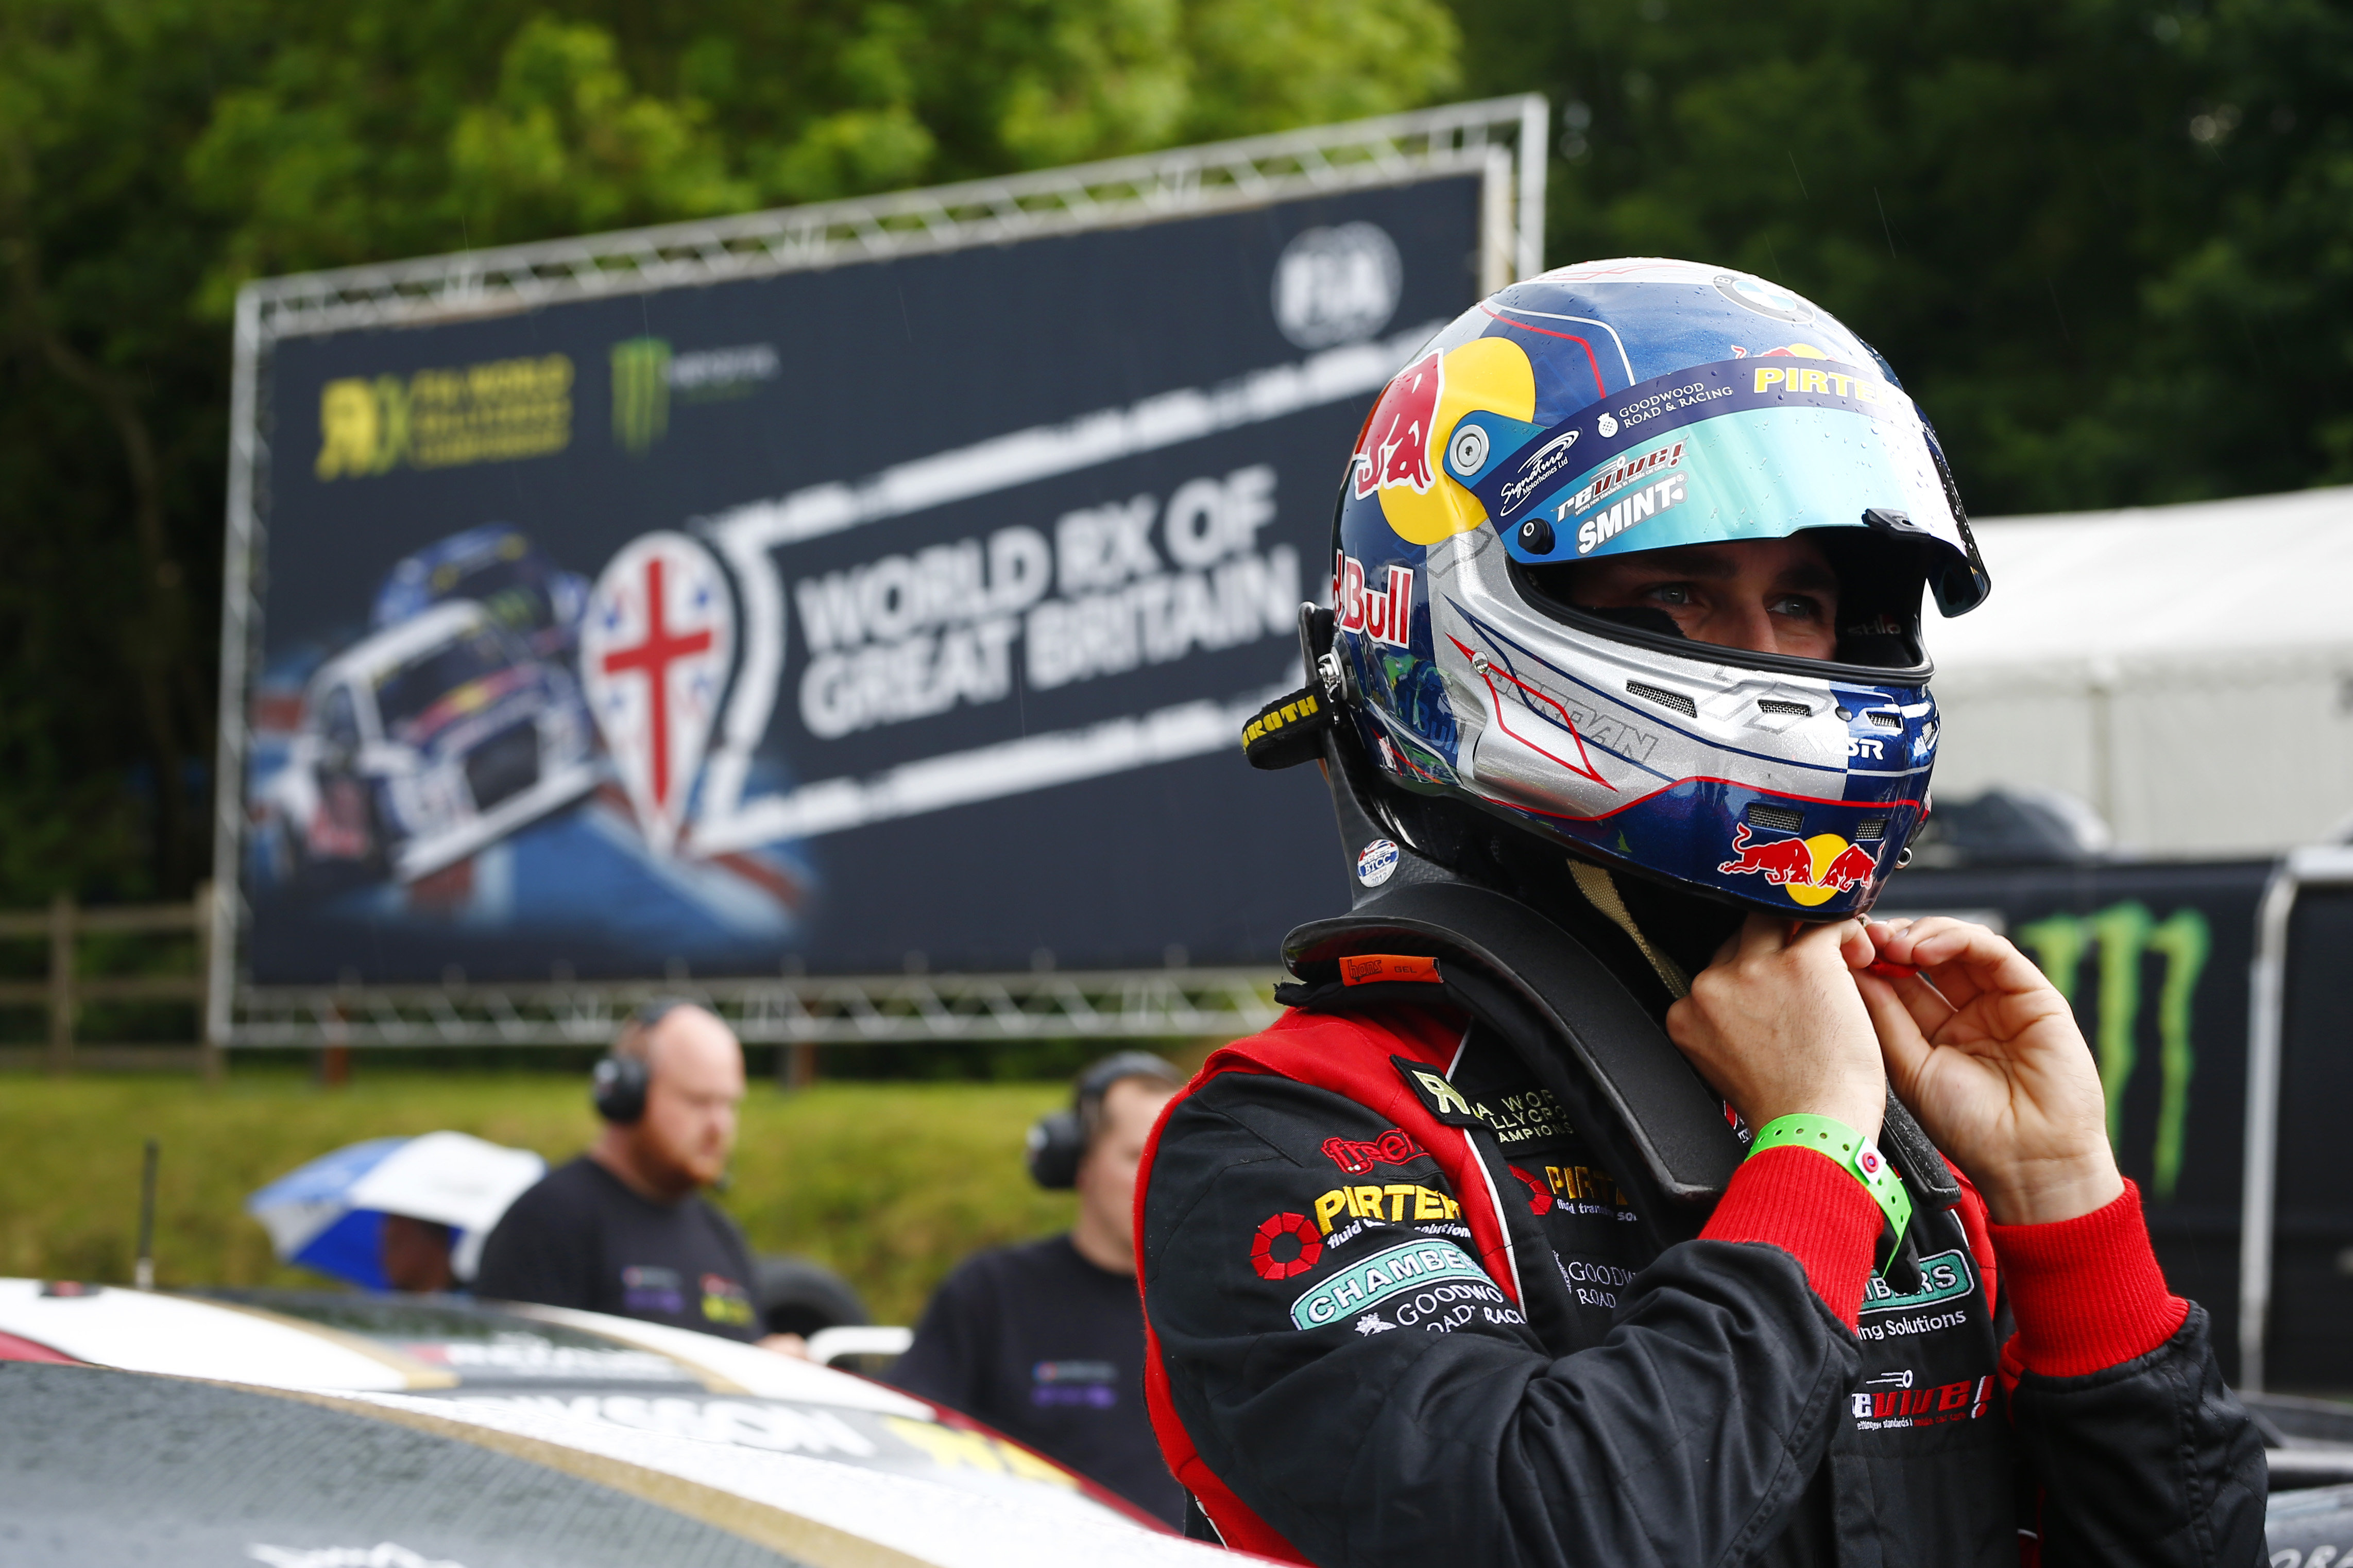 Jordan ready for World RX action at Silverstone